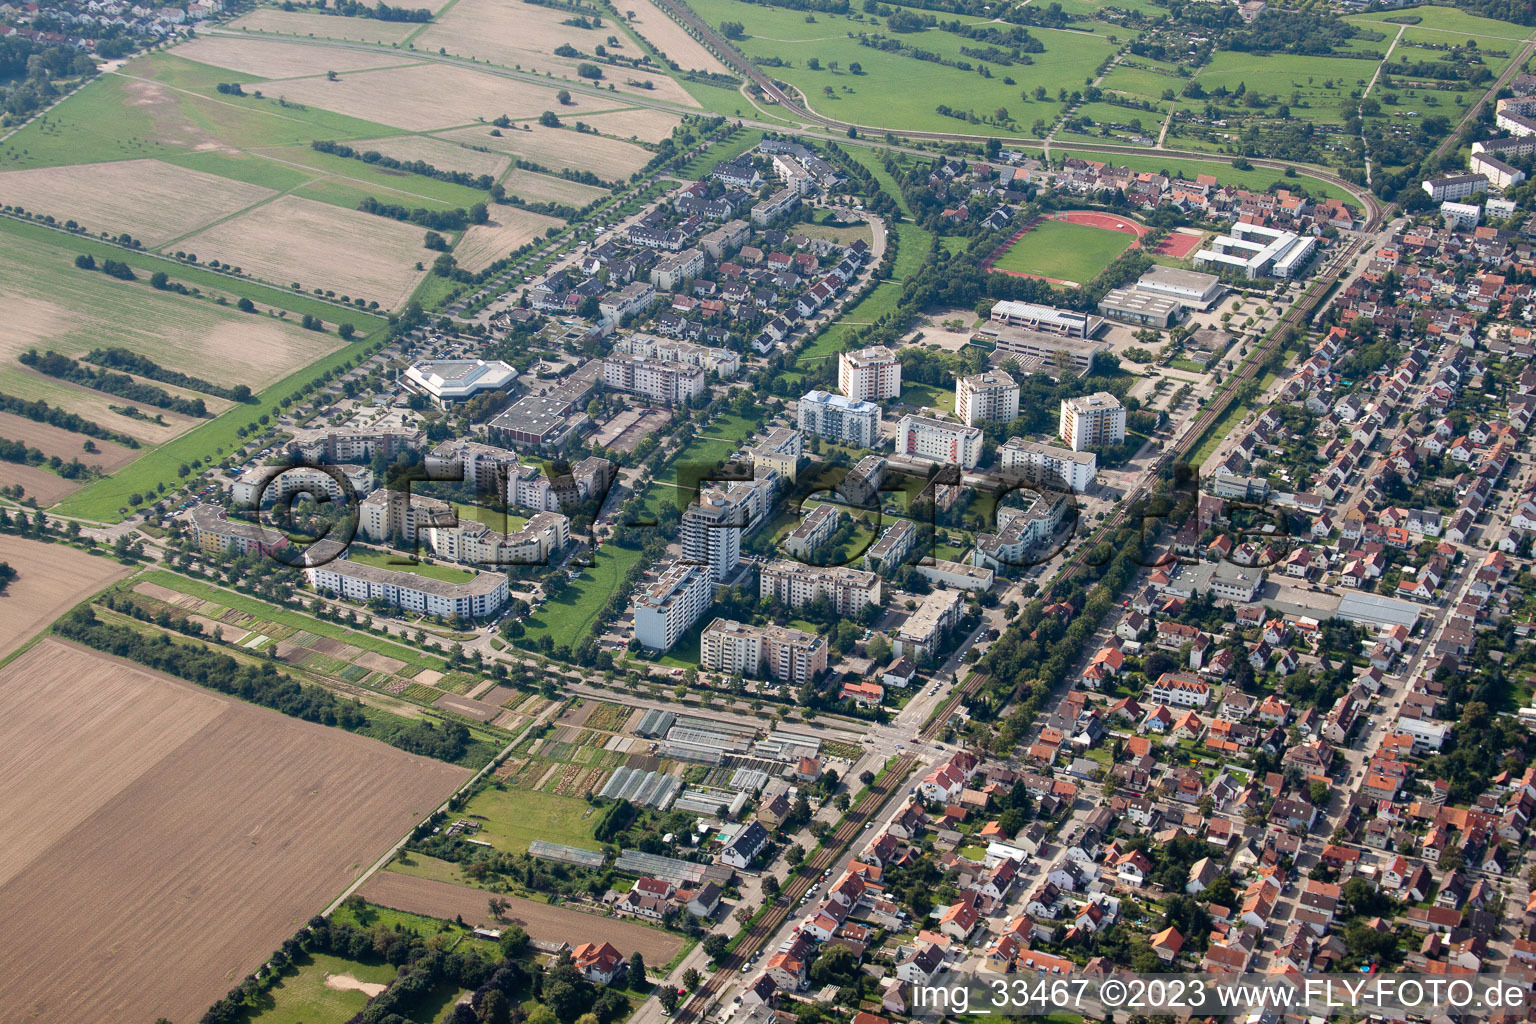 District Neureut in Karlsruhe in the state Baden-Wuerttemberg, Germany from a drone